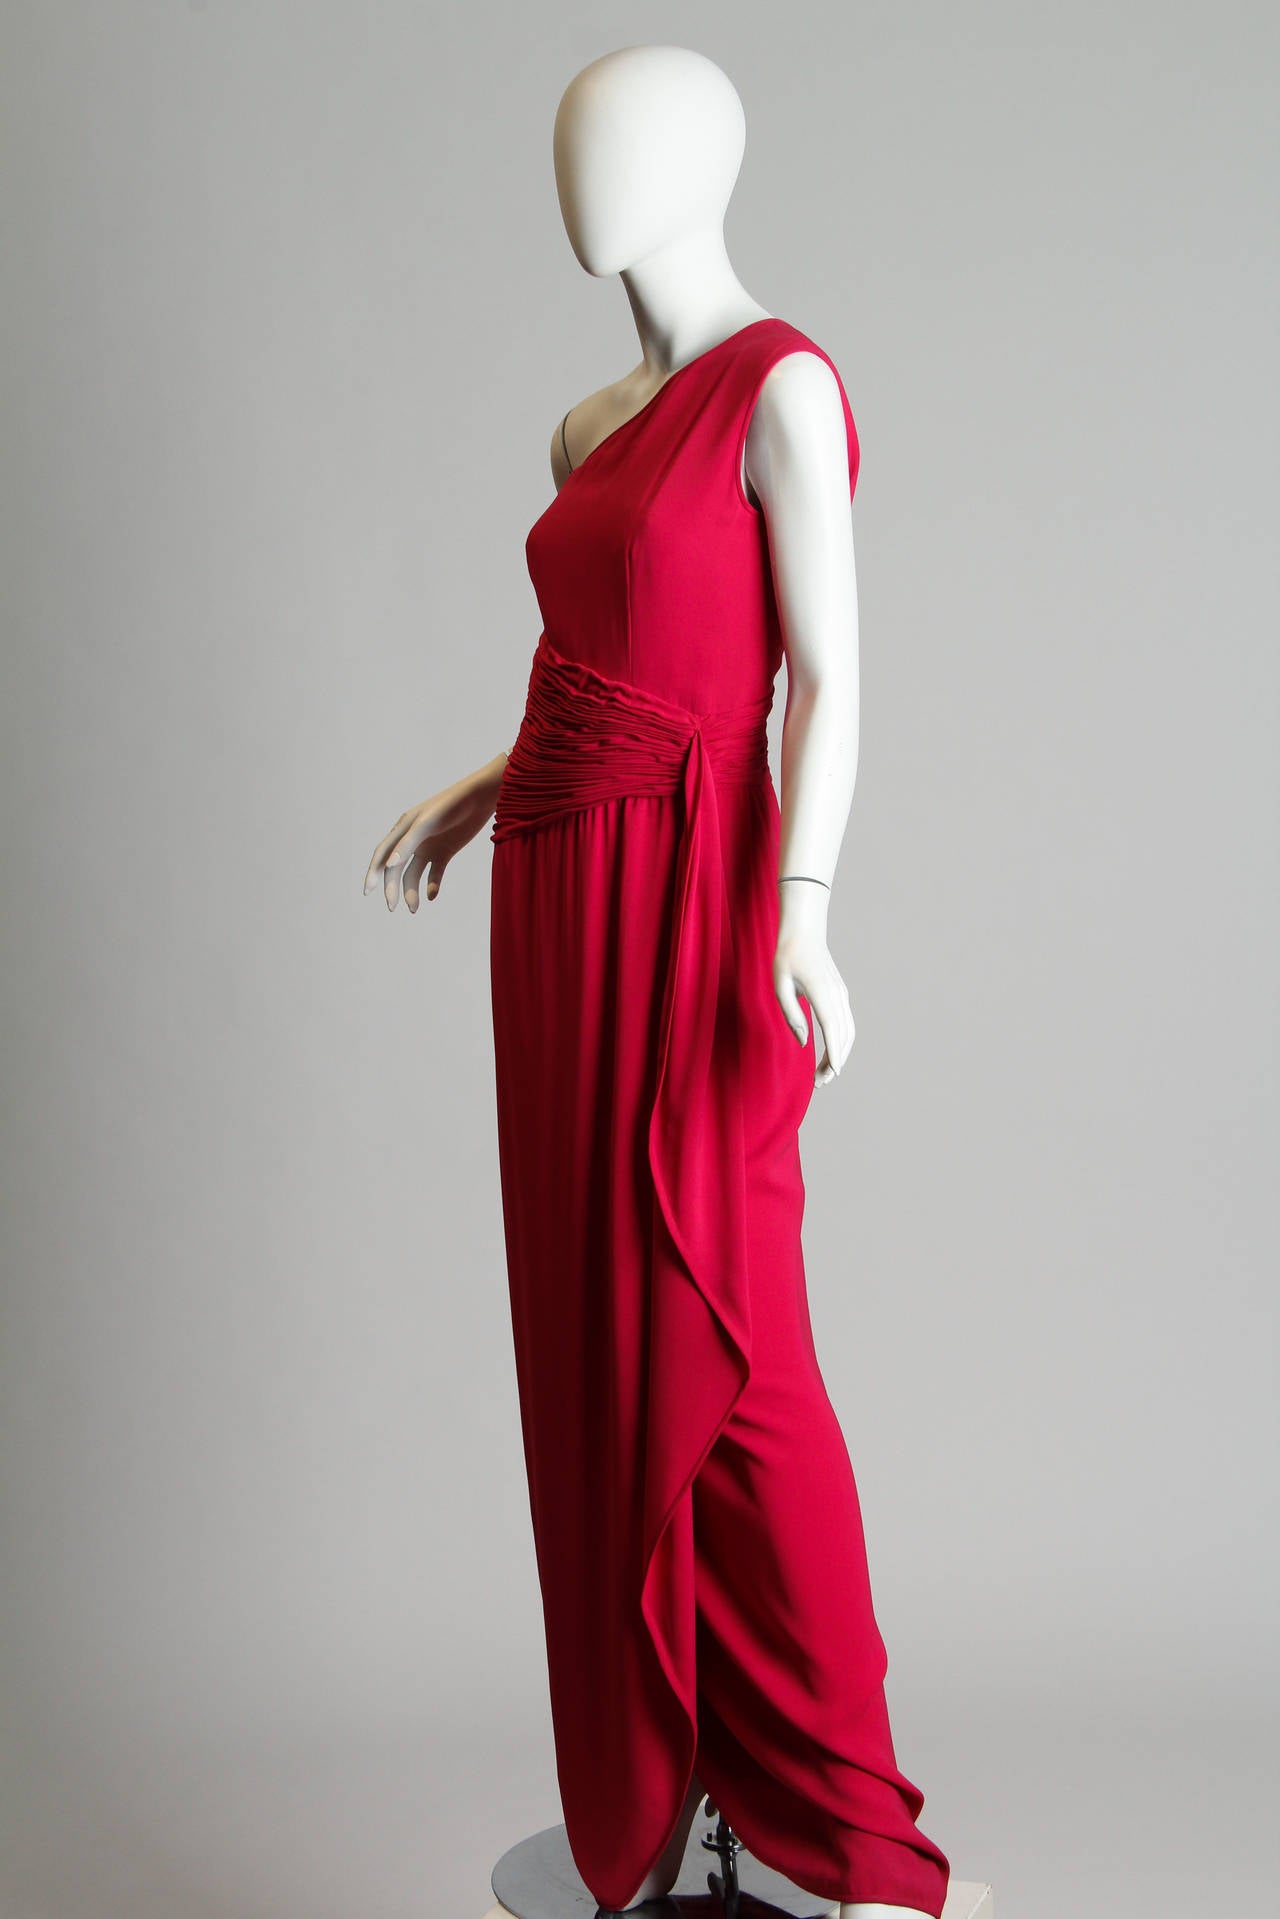 This striking pink gown is made in Italy by Valentino's Boutique collection for Bergdorf Goodman New York. The design plays with diagonals and angles, with a one-shoulder neckline, an asymmetrical ruched waistband, and a skirt which falls back on